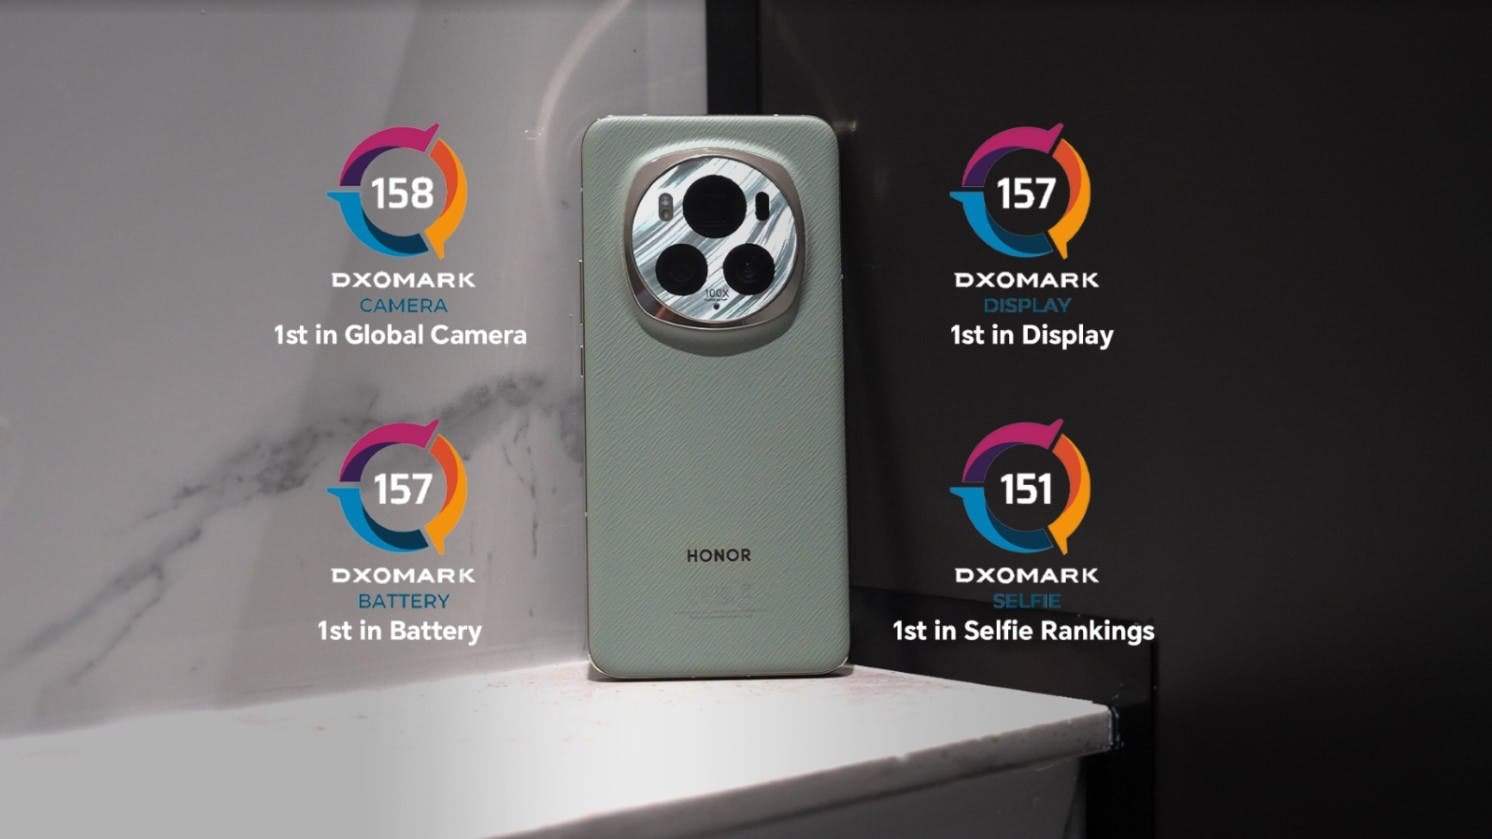 All Hail the Camera King! HONOR Magic6 Pro Ranks Number 1 in Camera Global Rankings